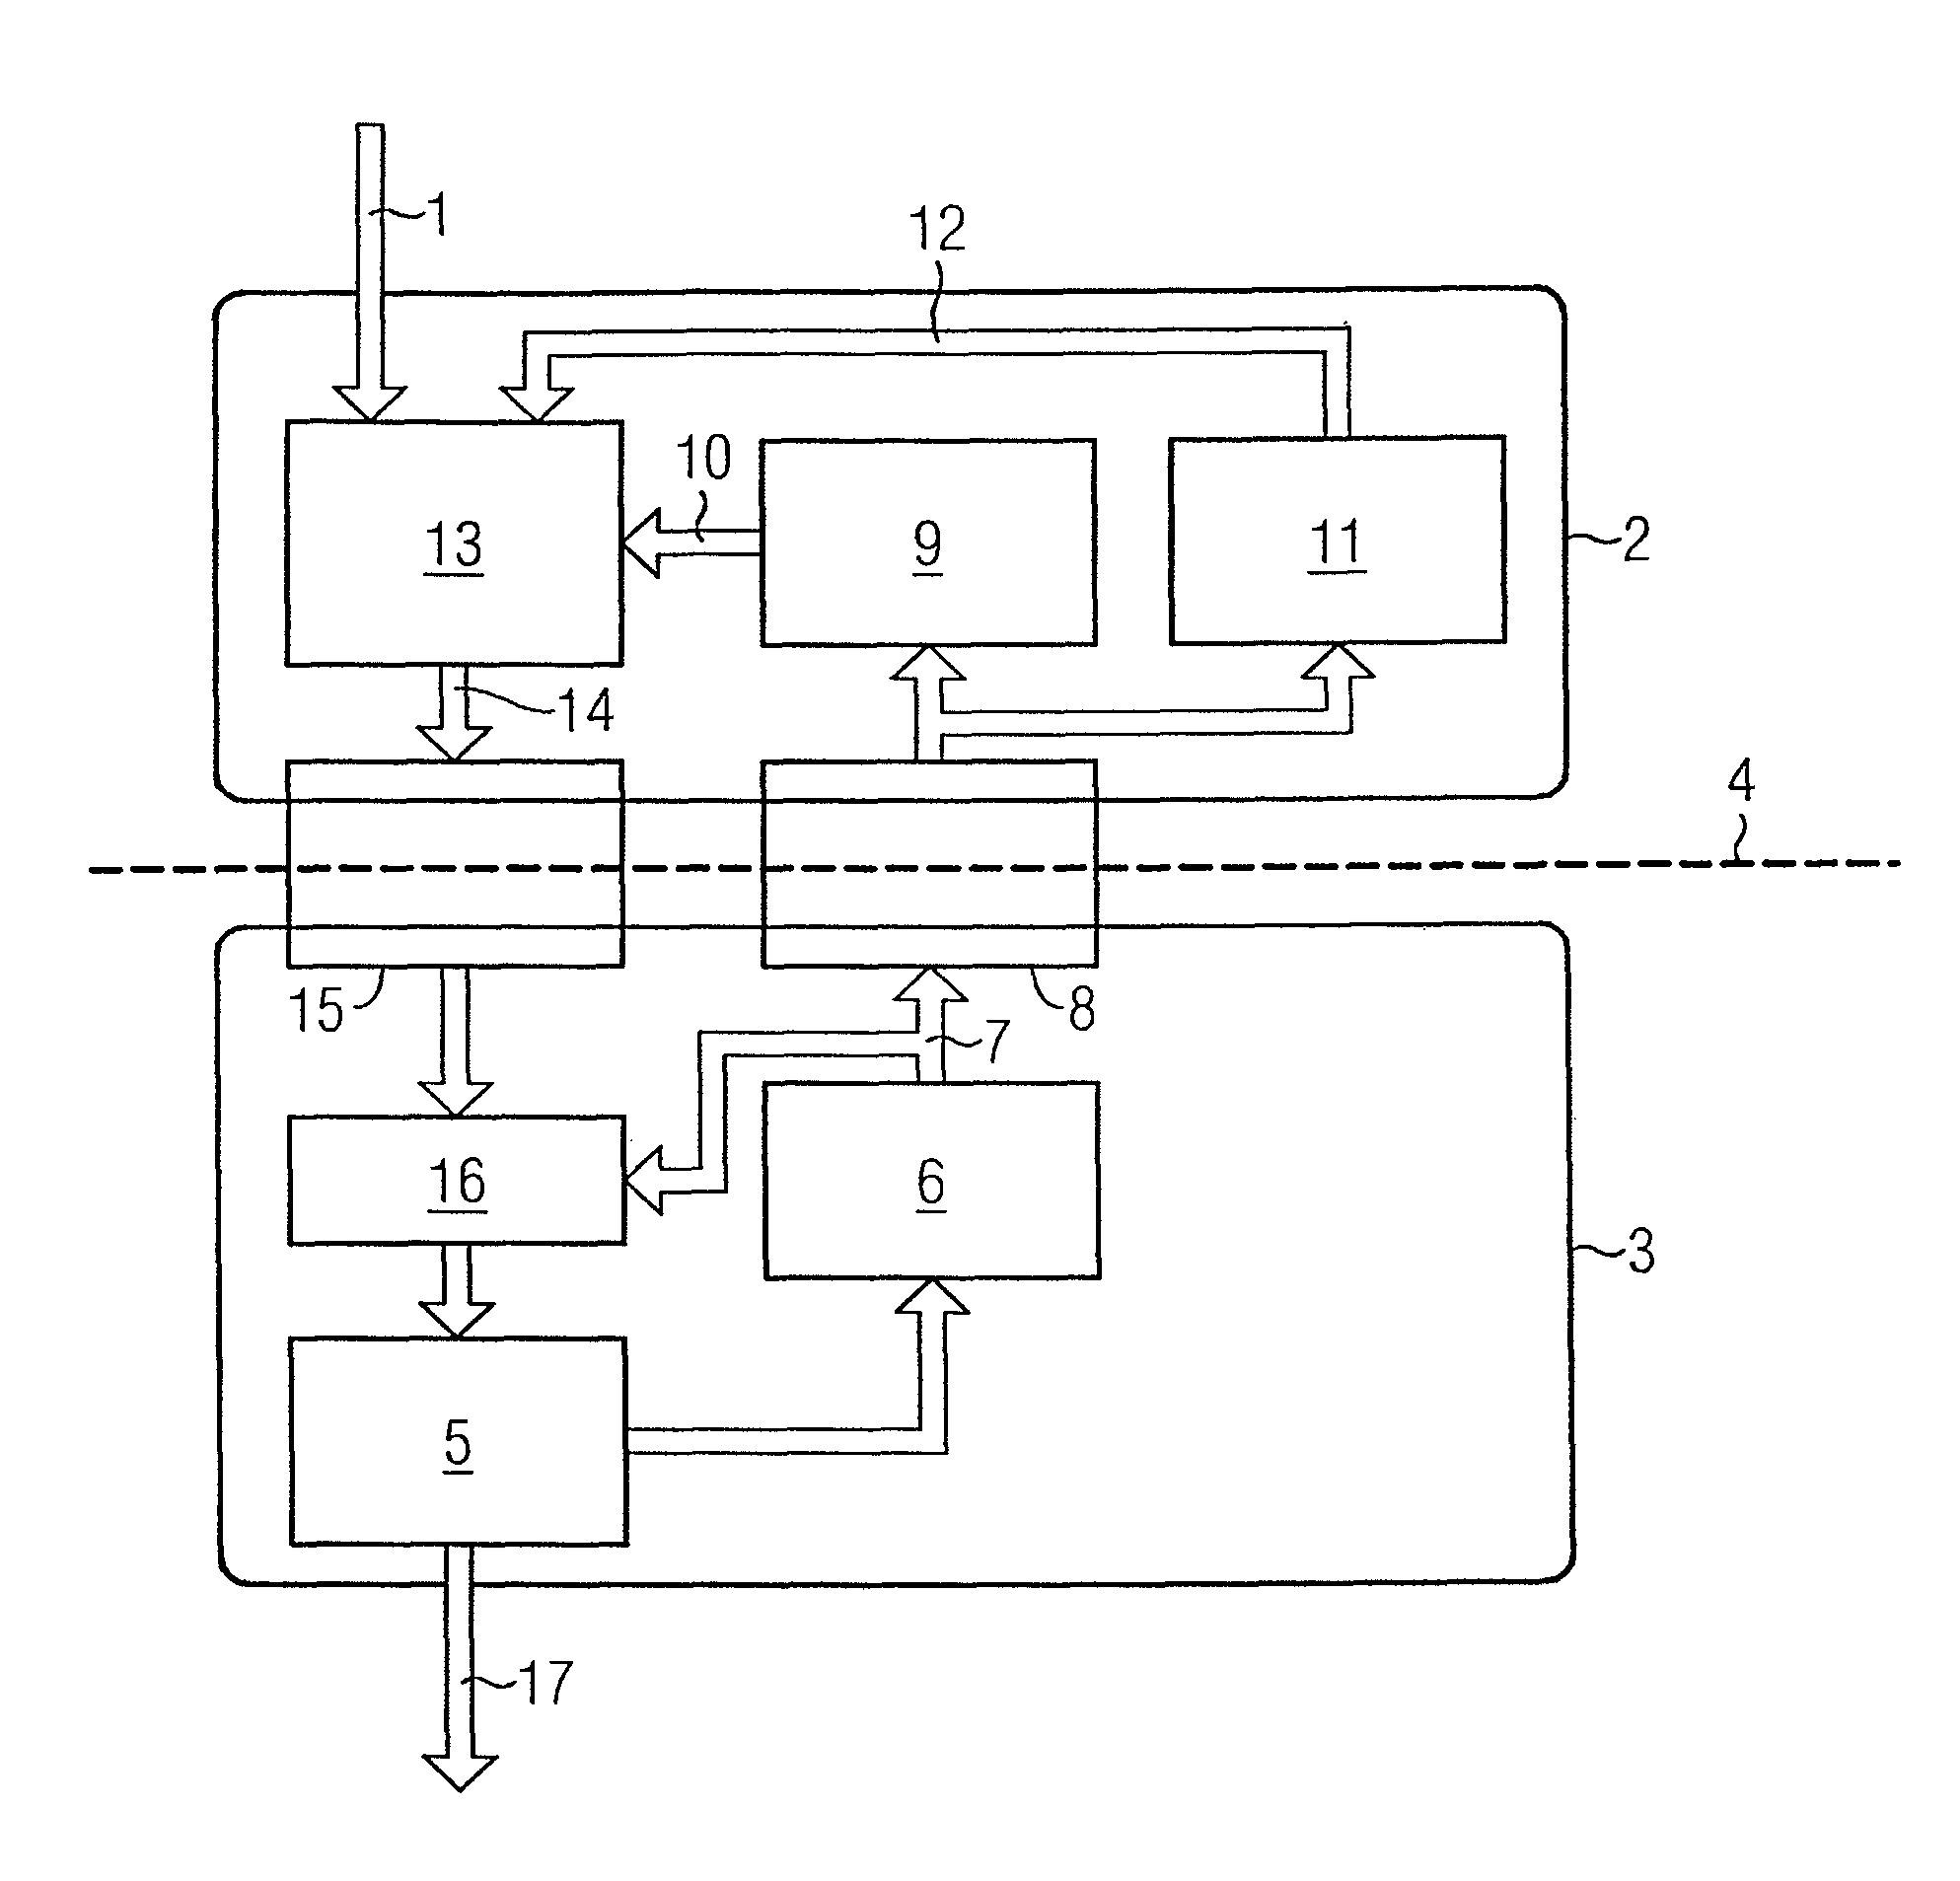 Circuit arrangement for detecting and digitizing an analog input signal, and field device for process instrumentation